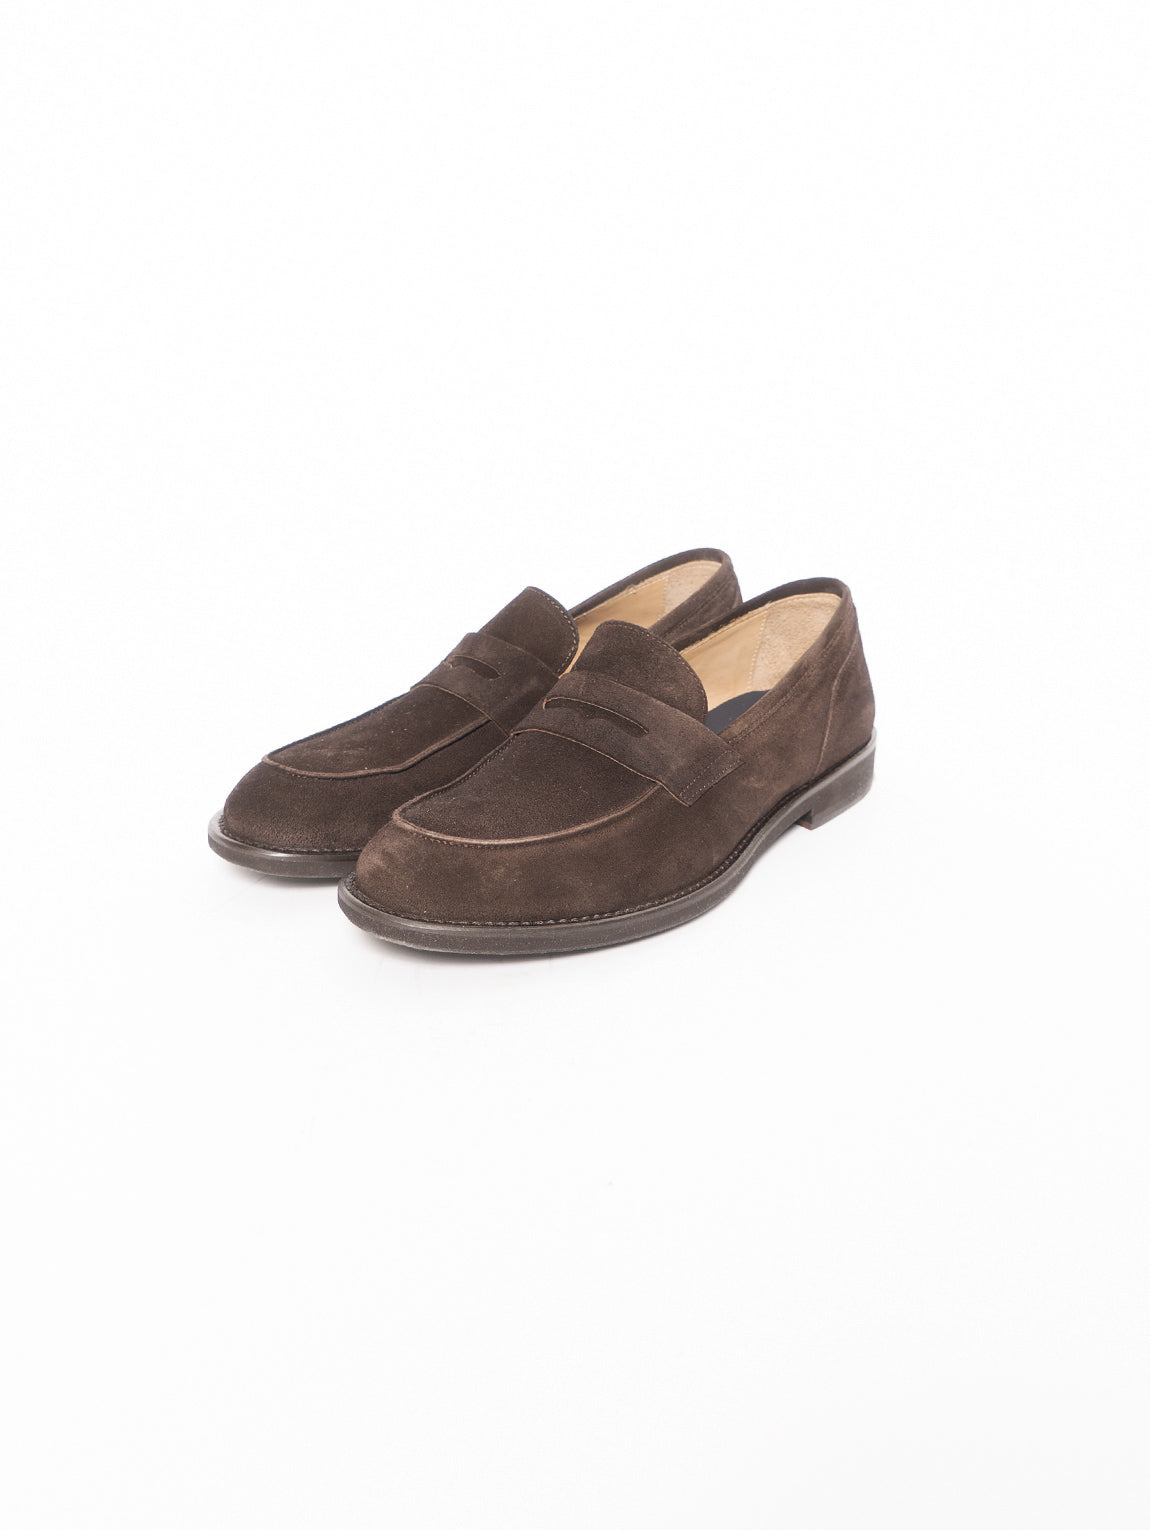 Suede leather moccasins